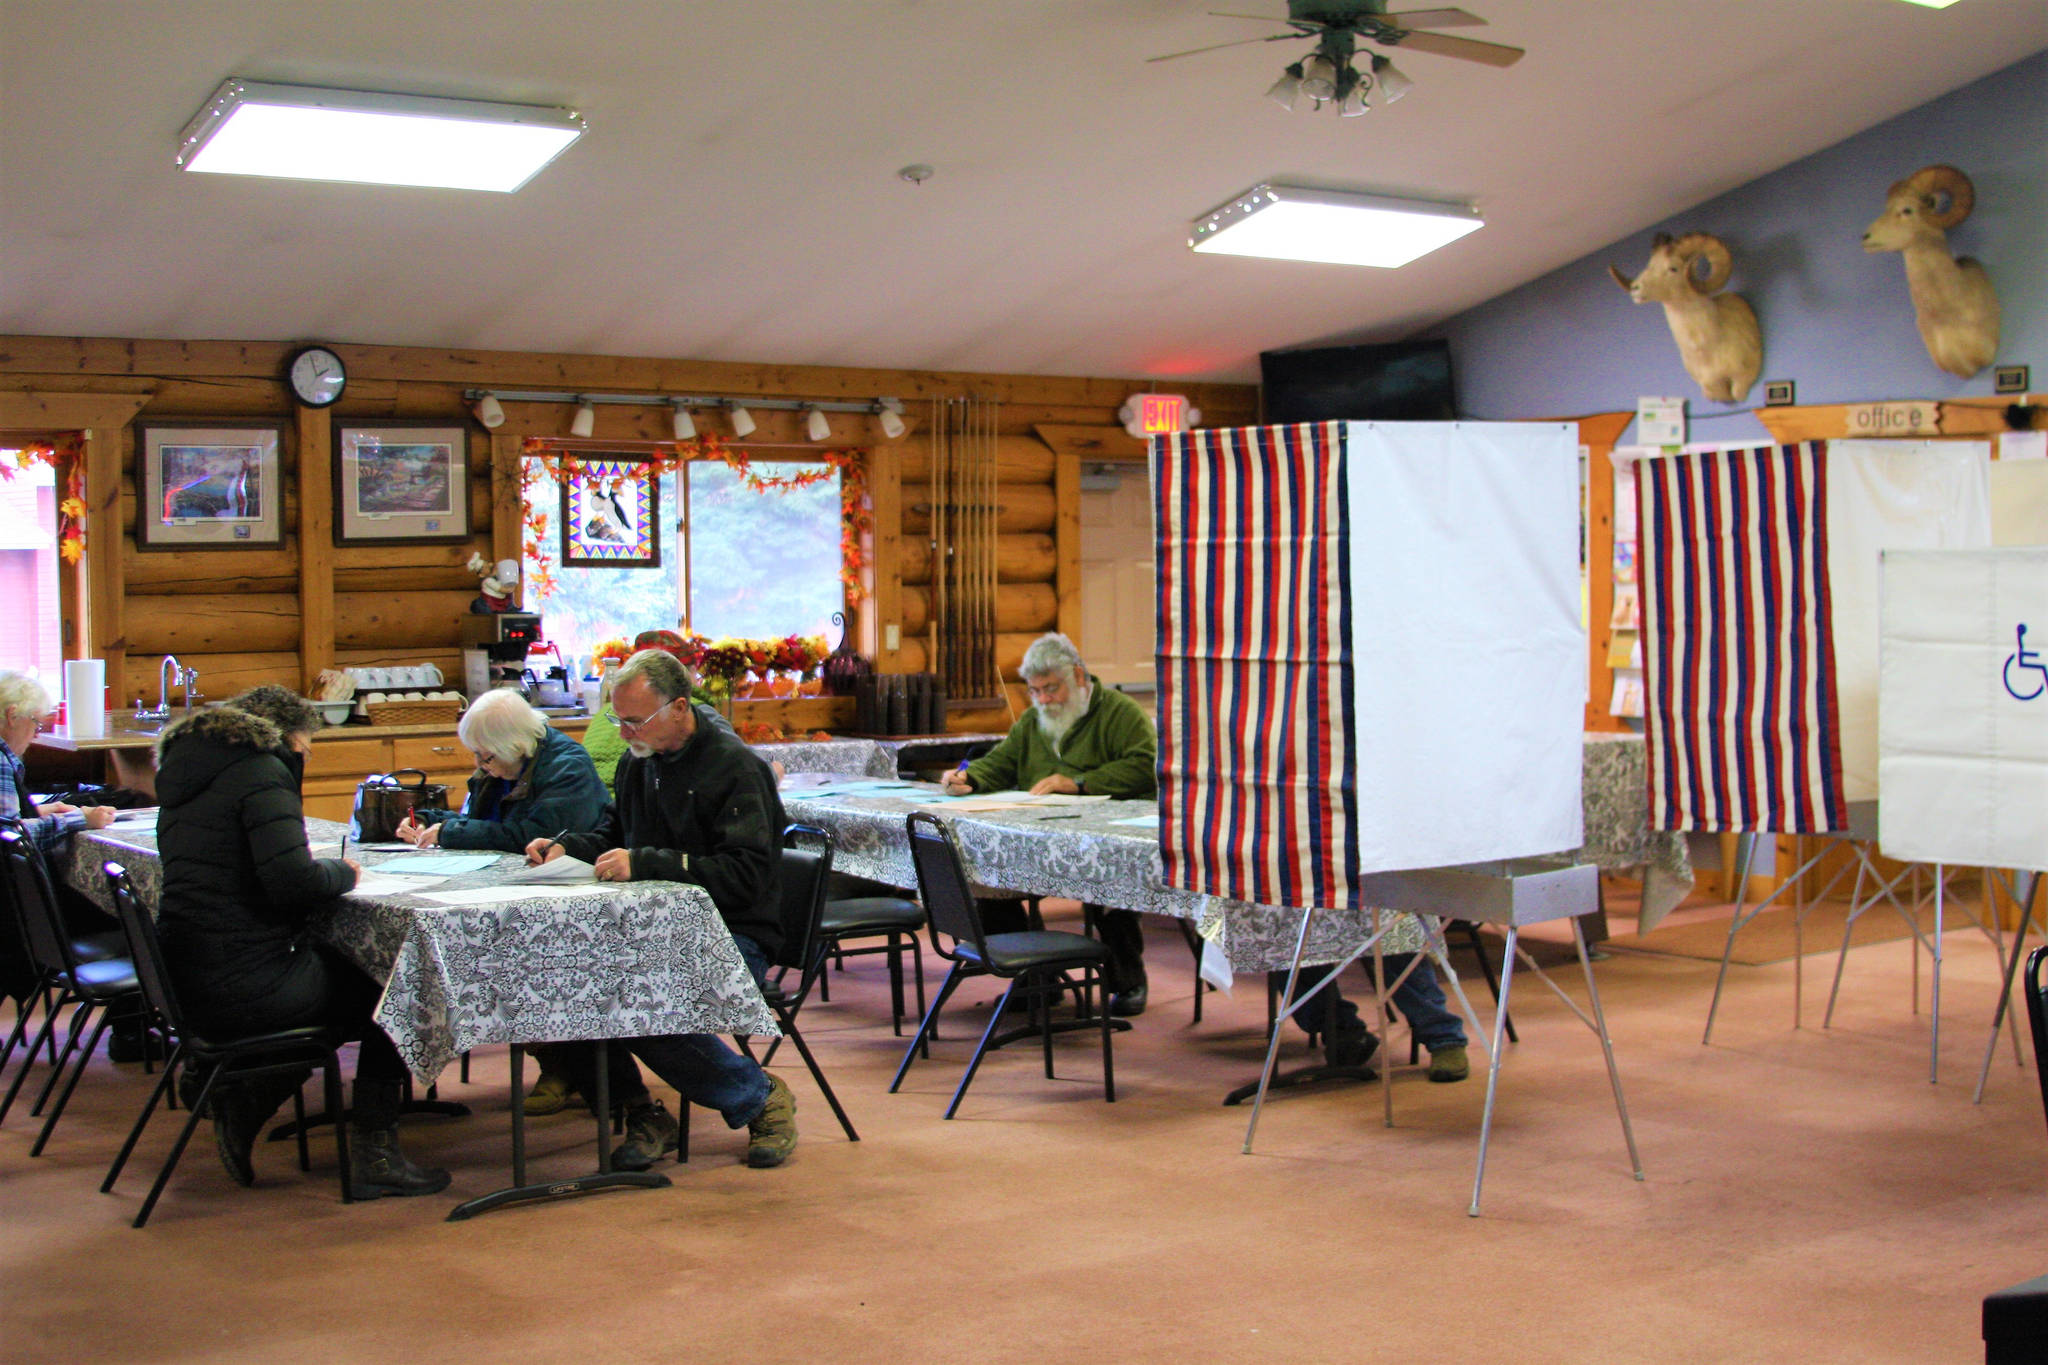 Anchor Point residents turn up to their polling place at the Anchor Point Senior Center to cast their ballots for the long-anticipated midterm elections on Tuesday, Nov. 6, 2018, in Anchor Point, Alaska. Election officials noted that voter turnout was one of the highest they’d seen in the community, and remained steady all day. (Photo by Delcenia Cosman)